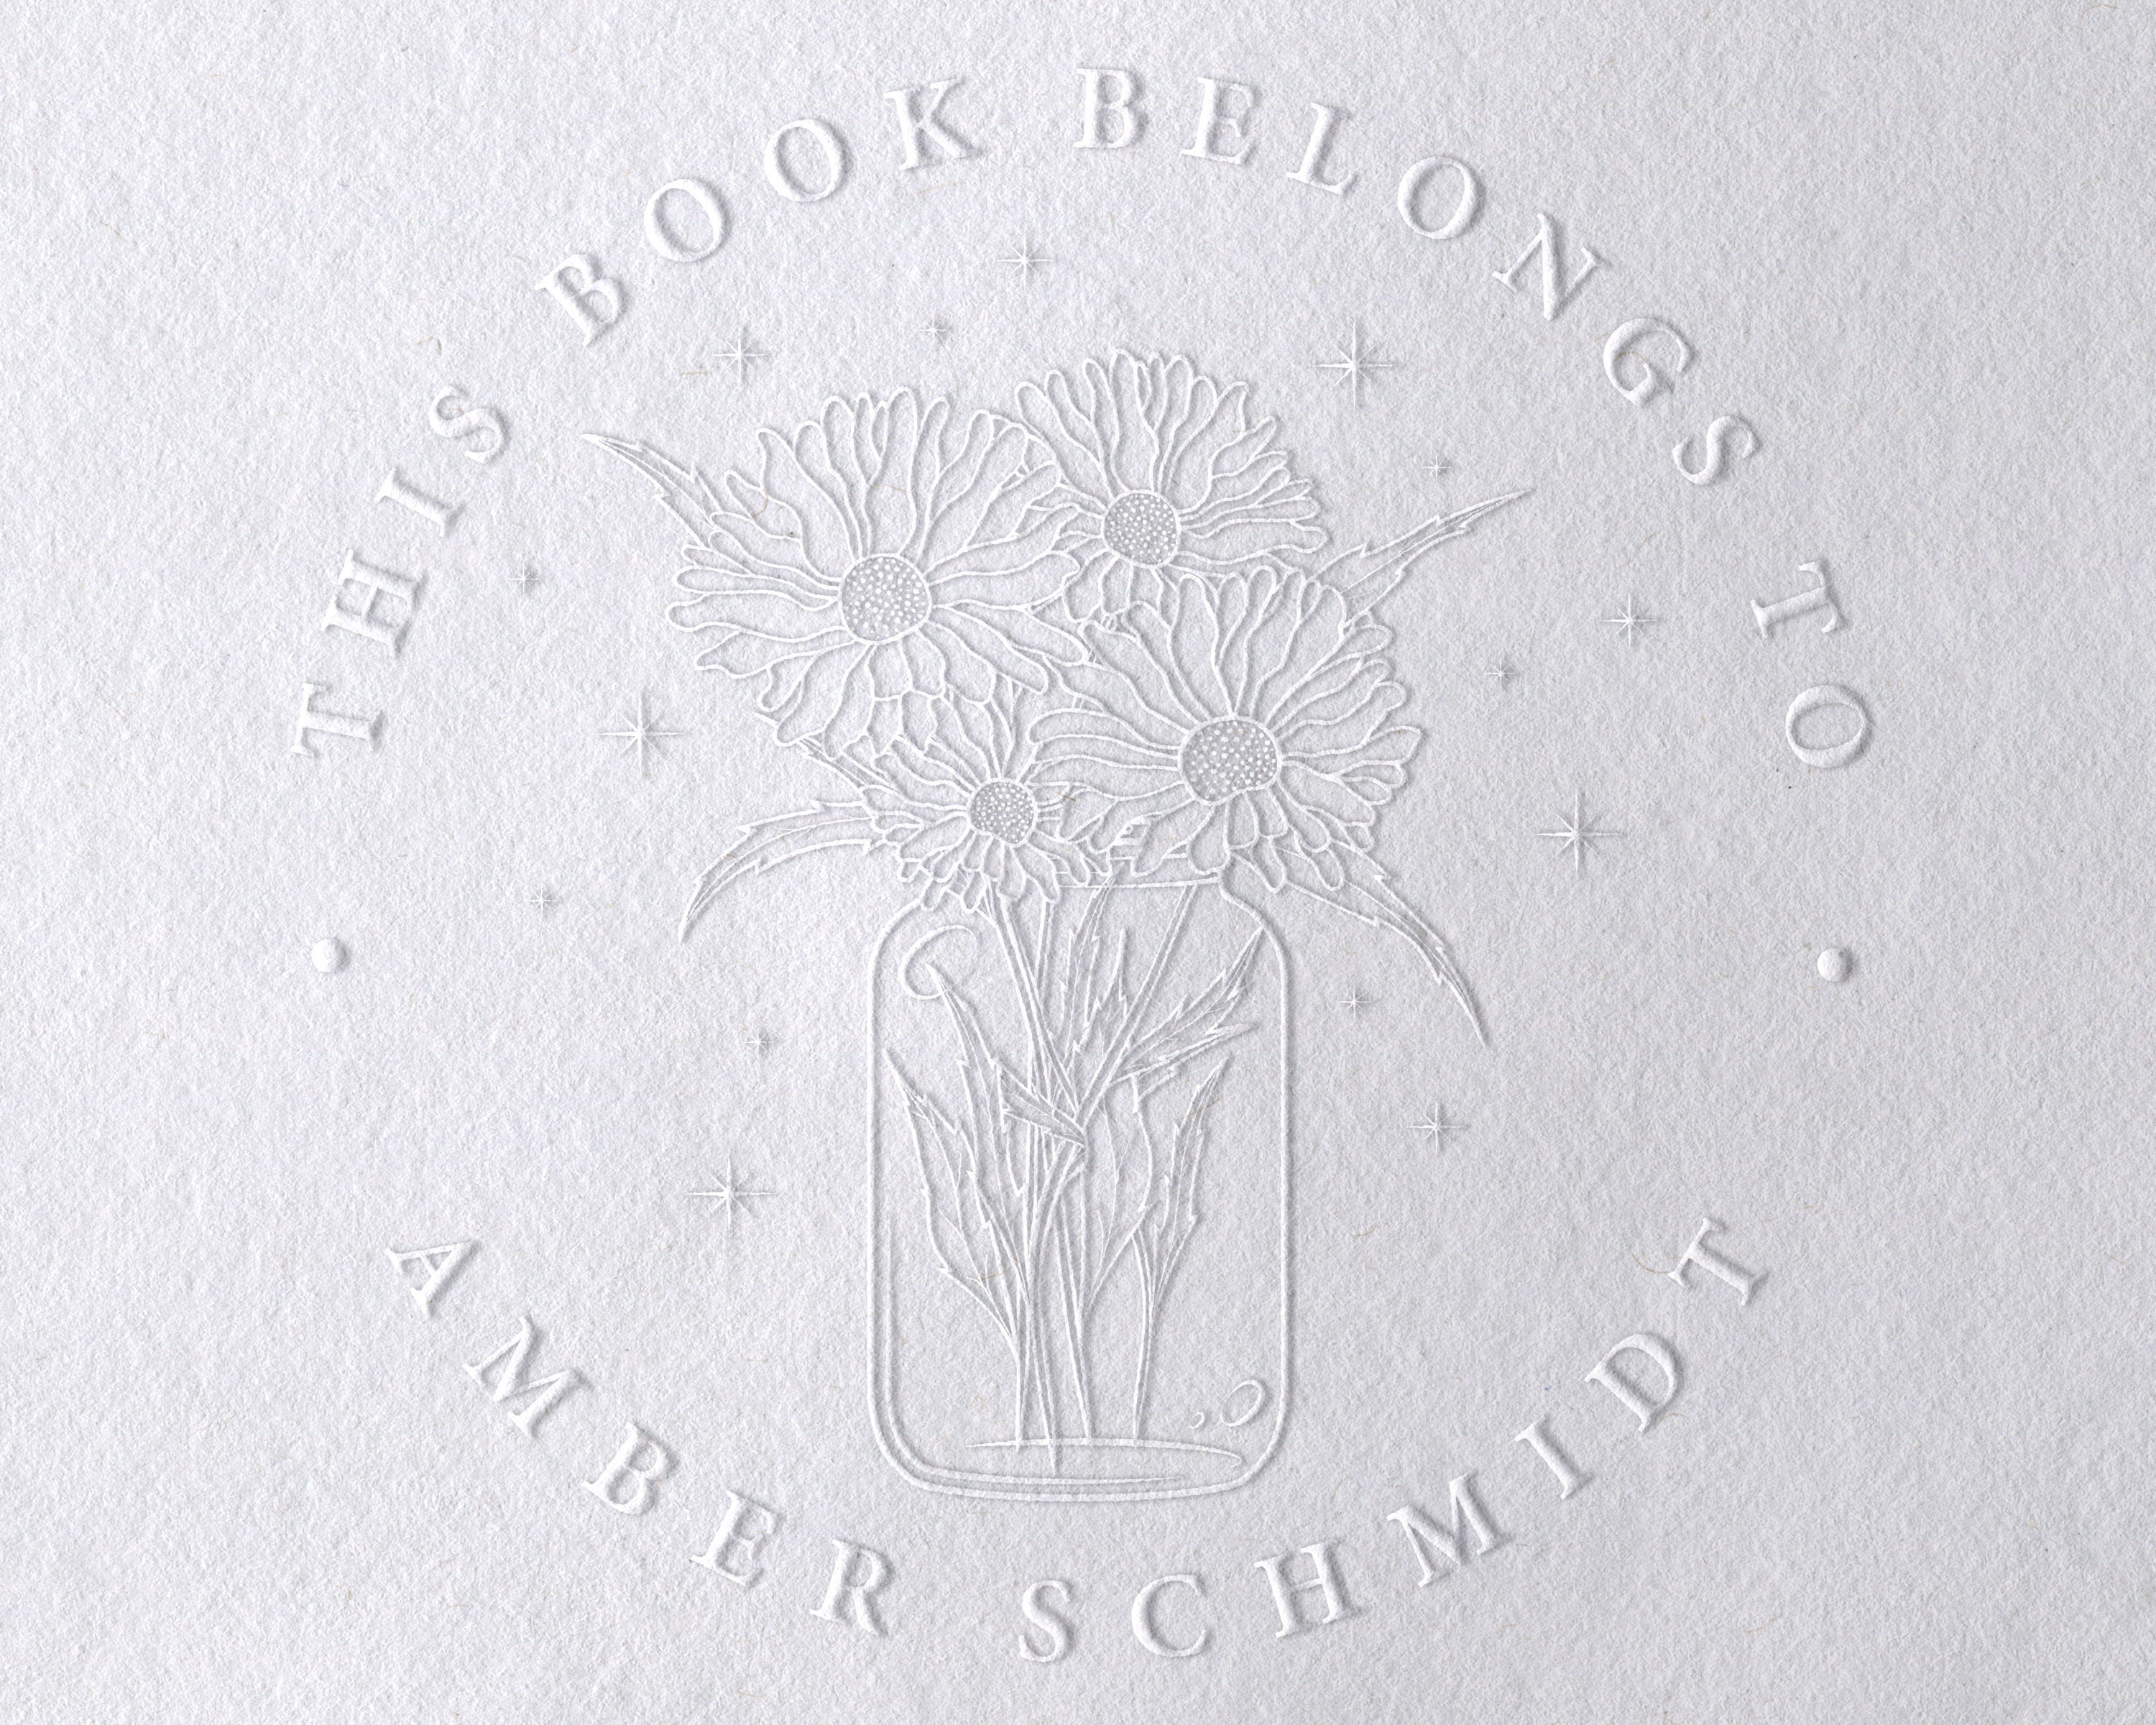 From the Library of Embosser, Custom Embosser Stamp,book Embosser,library  Stamp, Personalized Monogram Embosser Stamp, Embosser Gift Set 